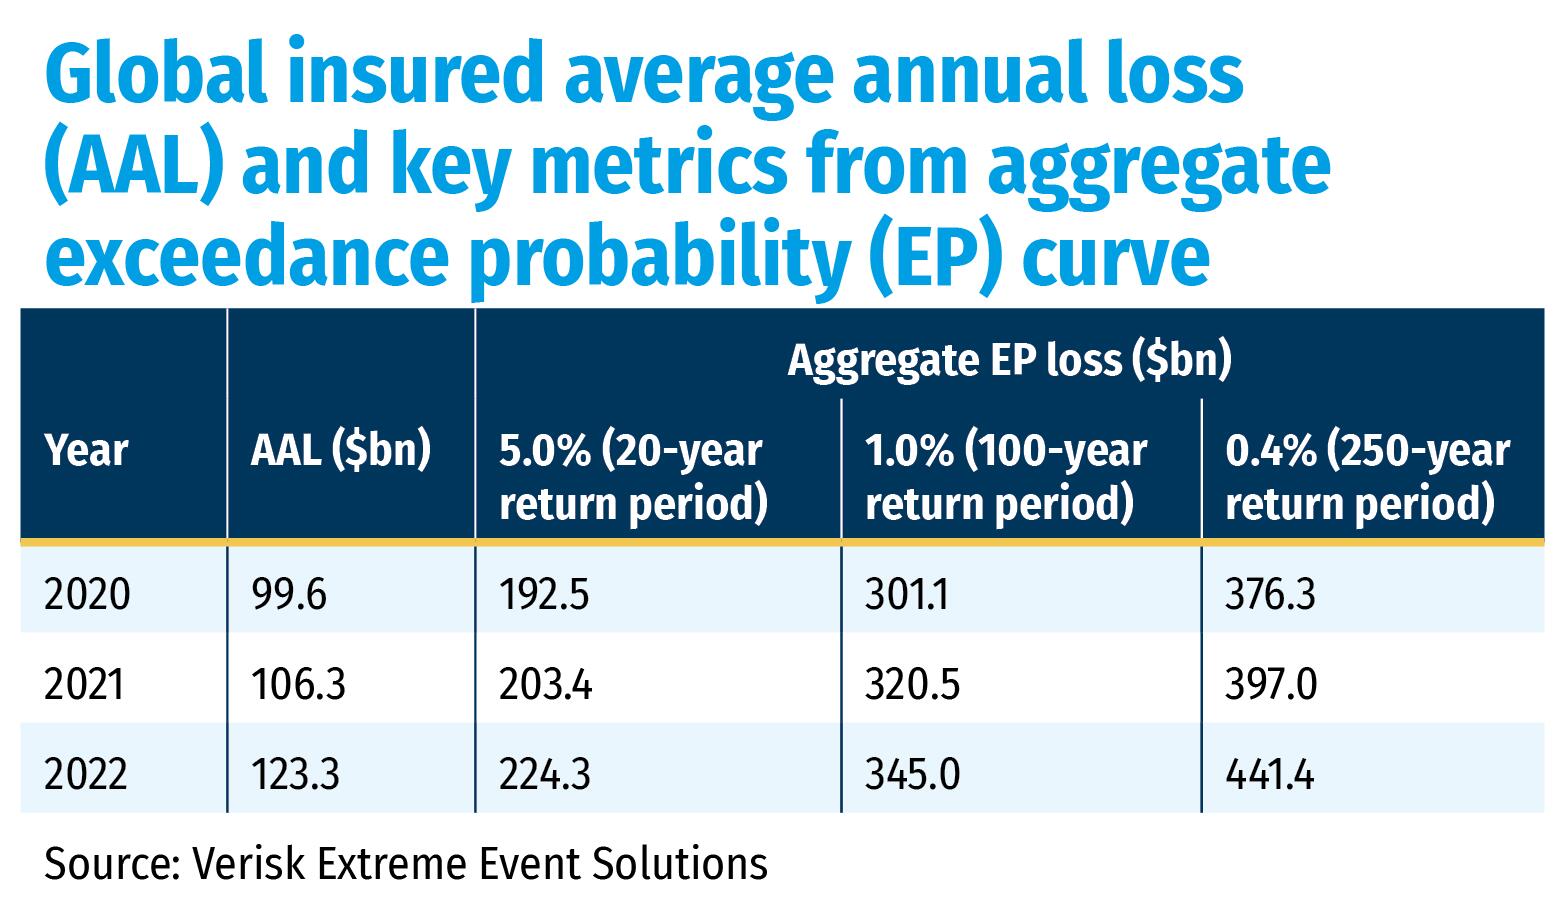 Global insured average annual loss (AAL) and key metrics from aggregate exceedance probability (EP) curve